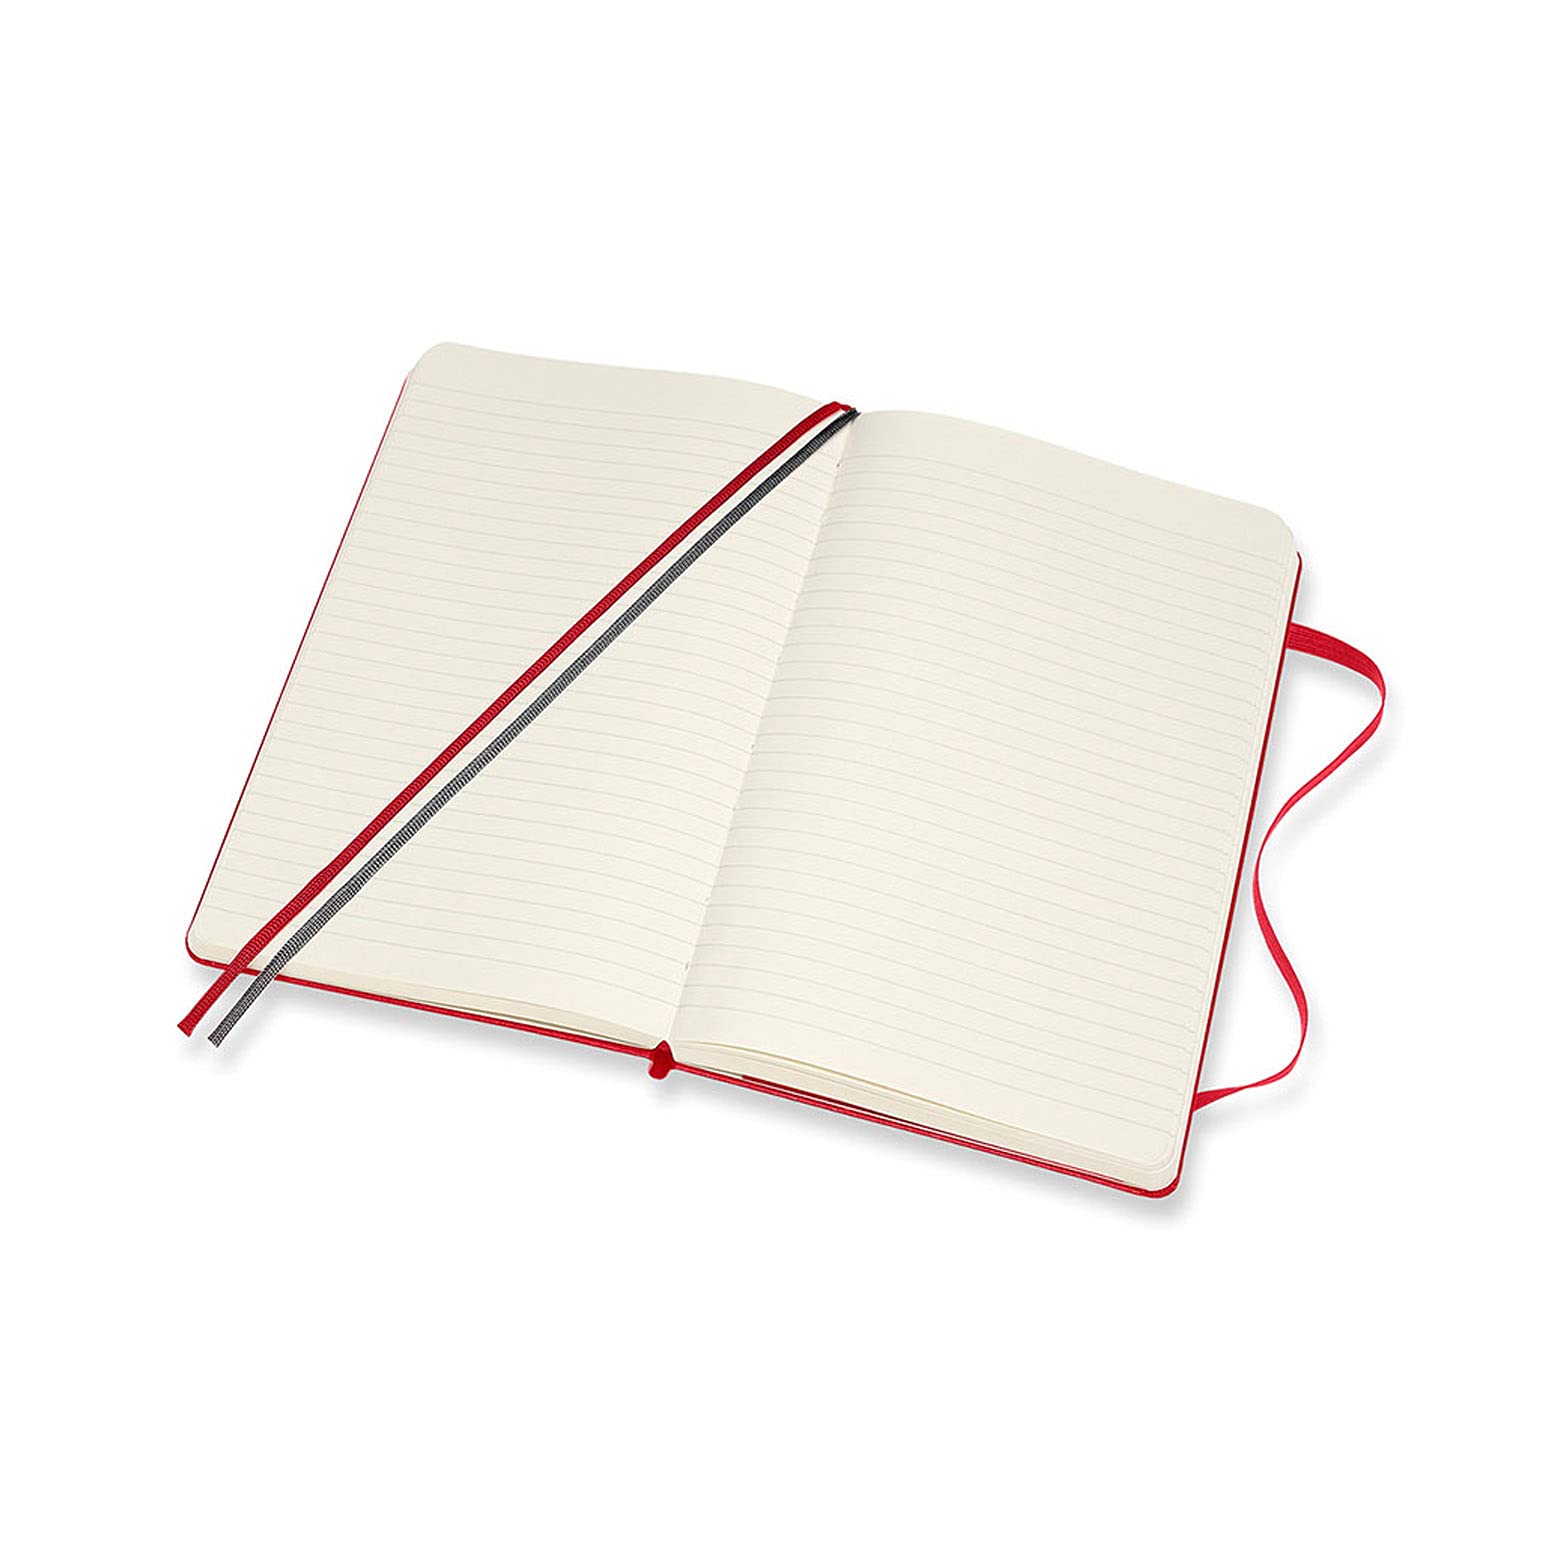 MOLESKINE Classic Expanded L Ruled Hard Scar. Red